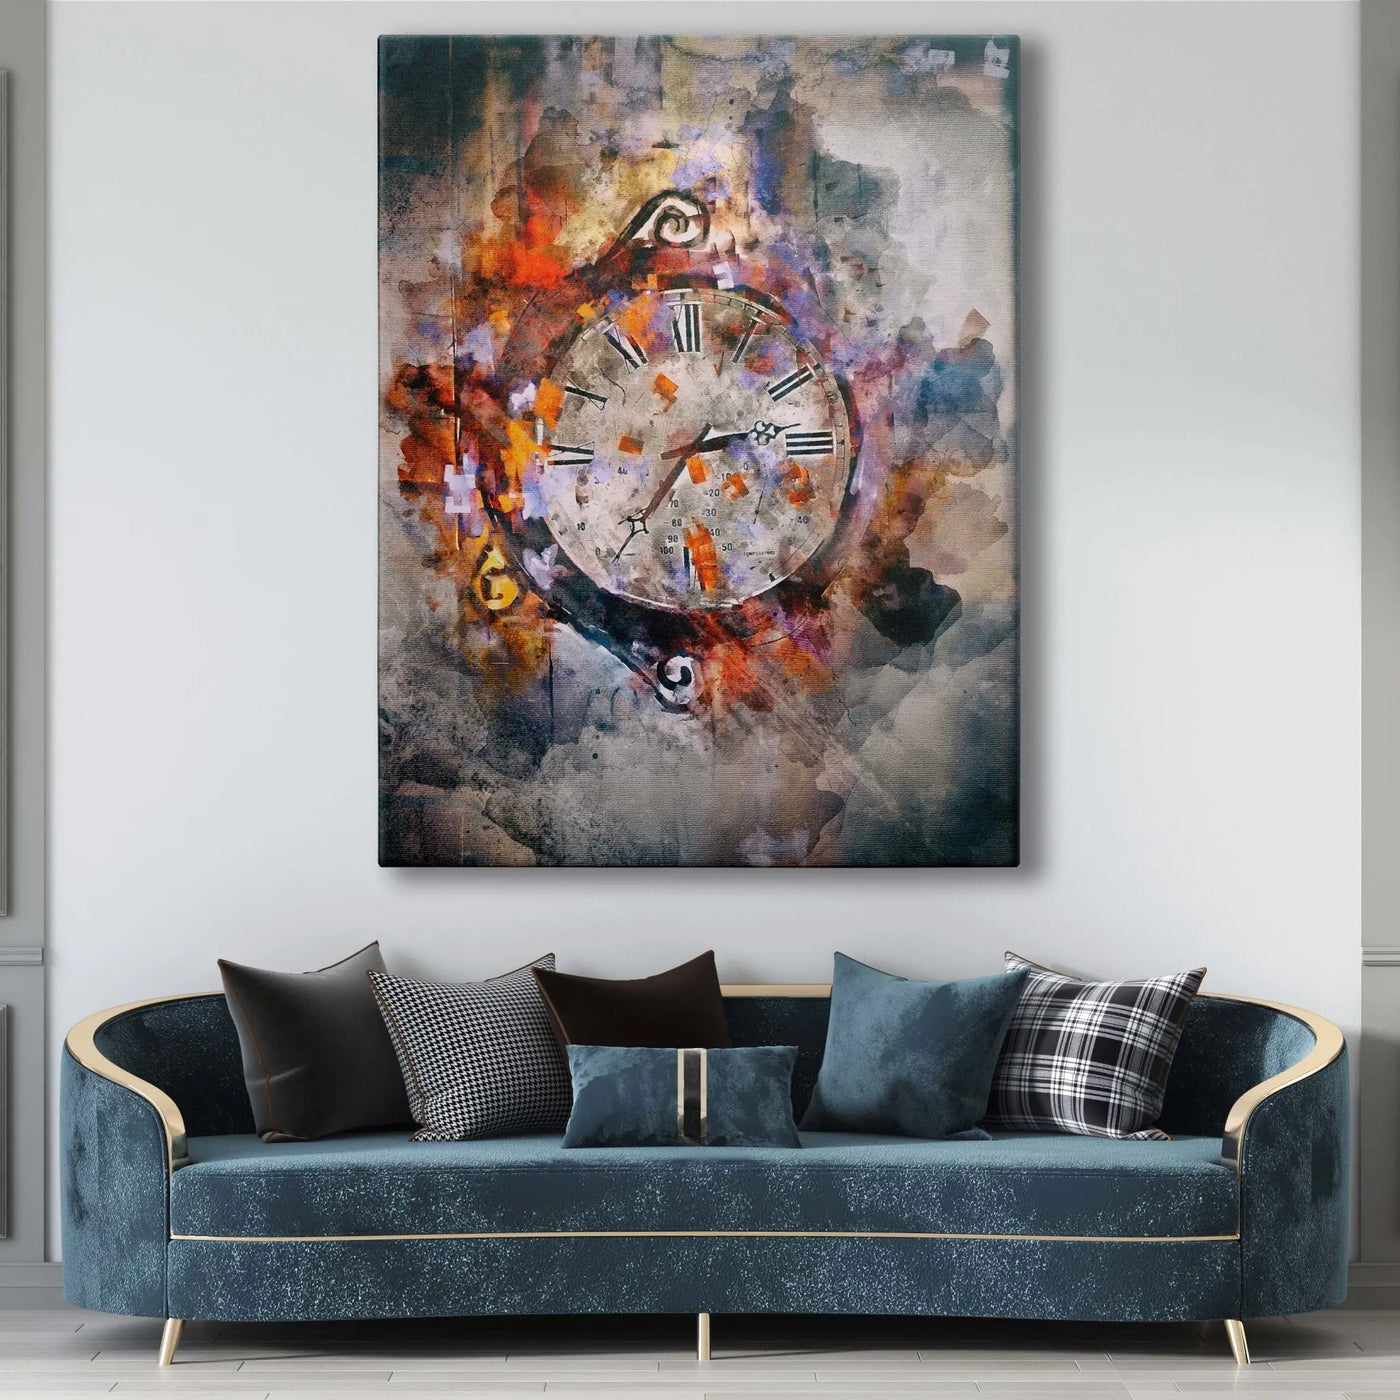 "COLORFUL TIME" - Art For Everyone